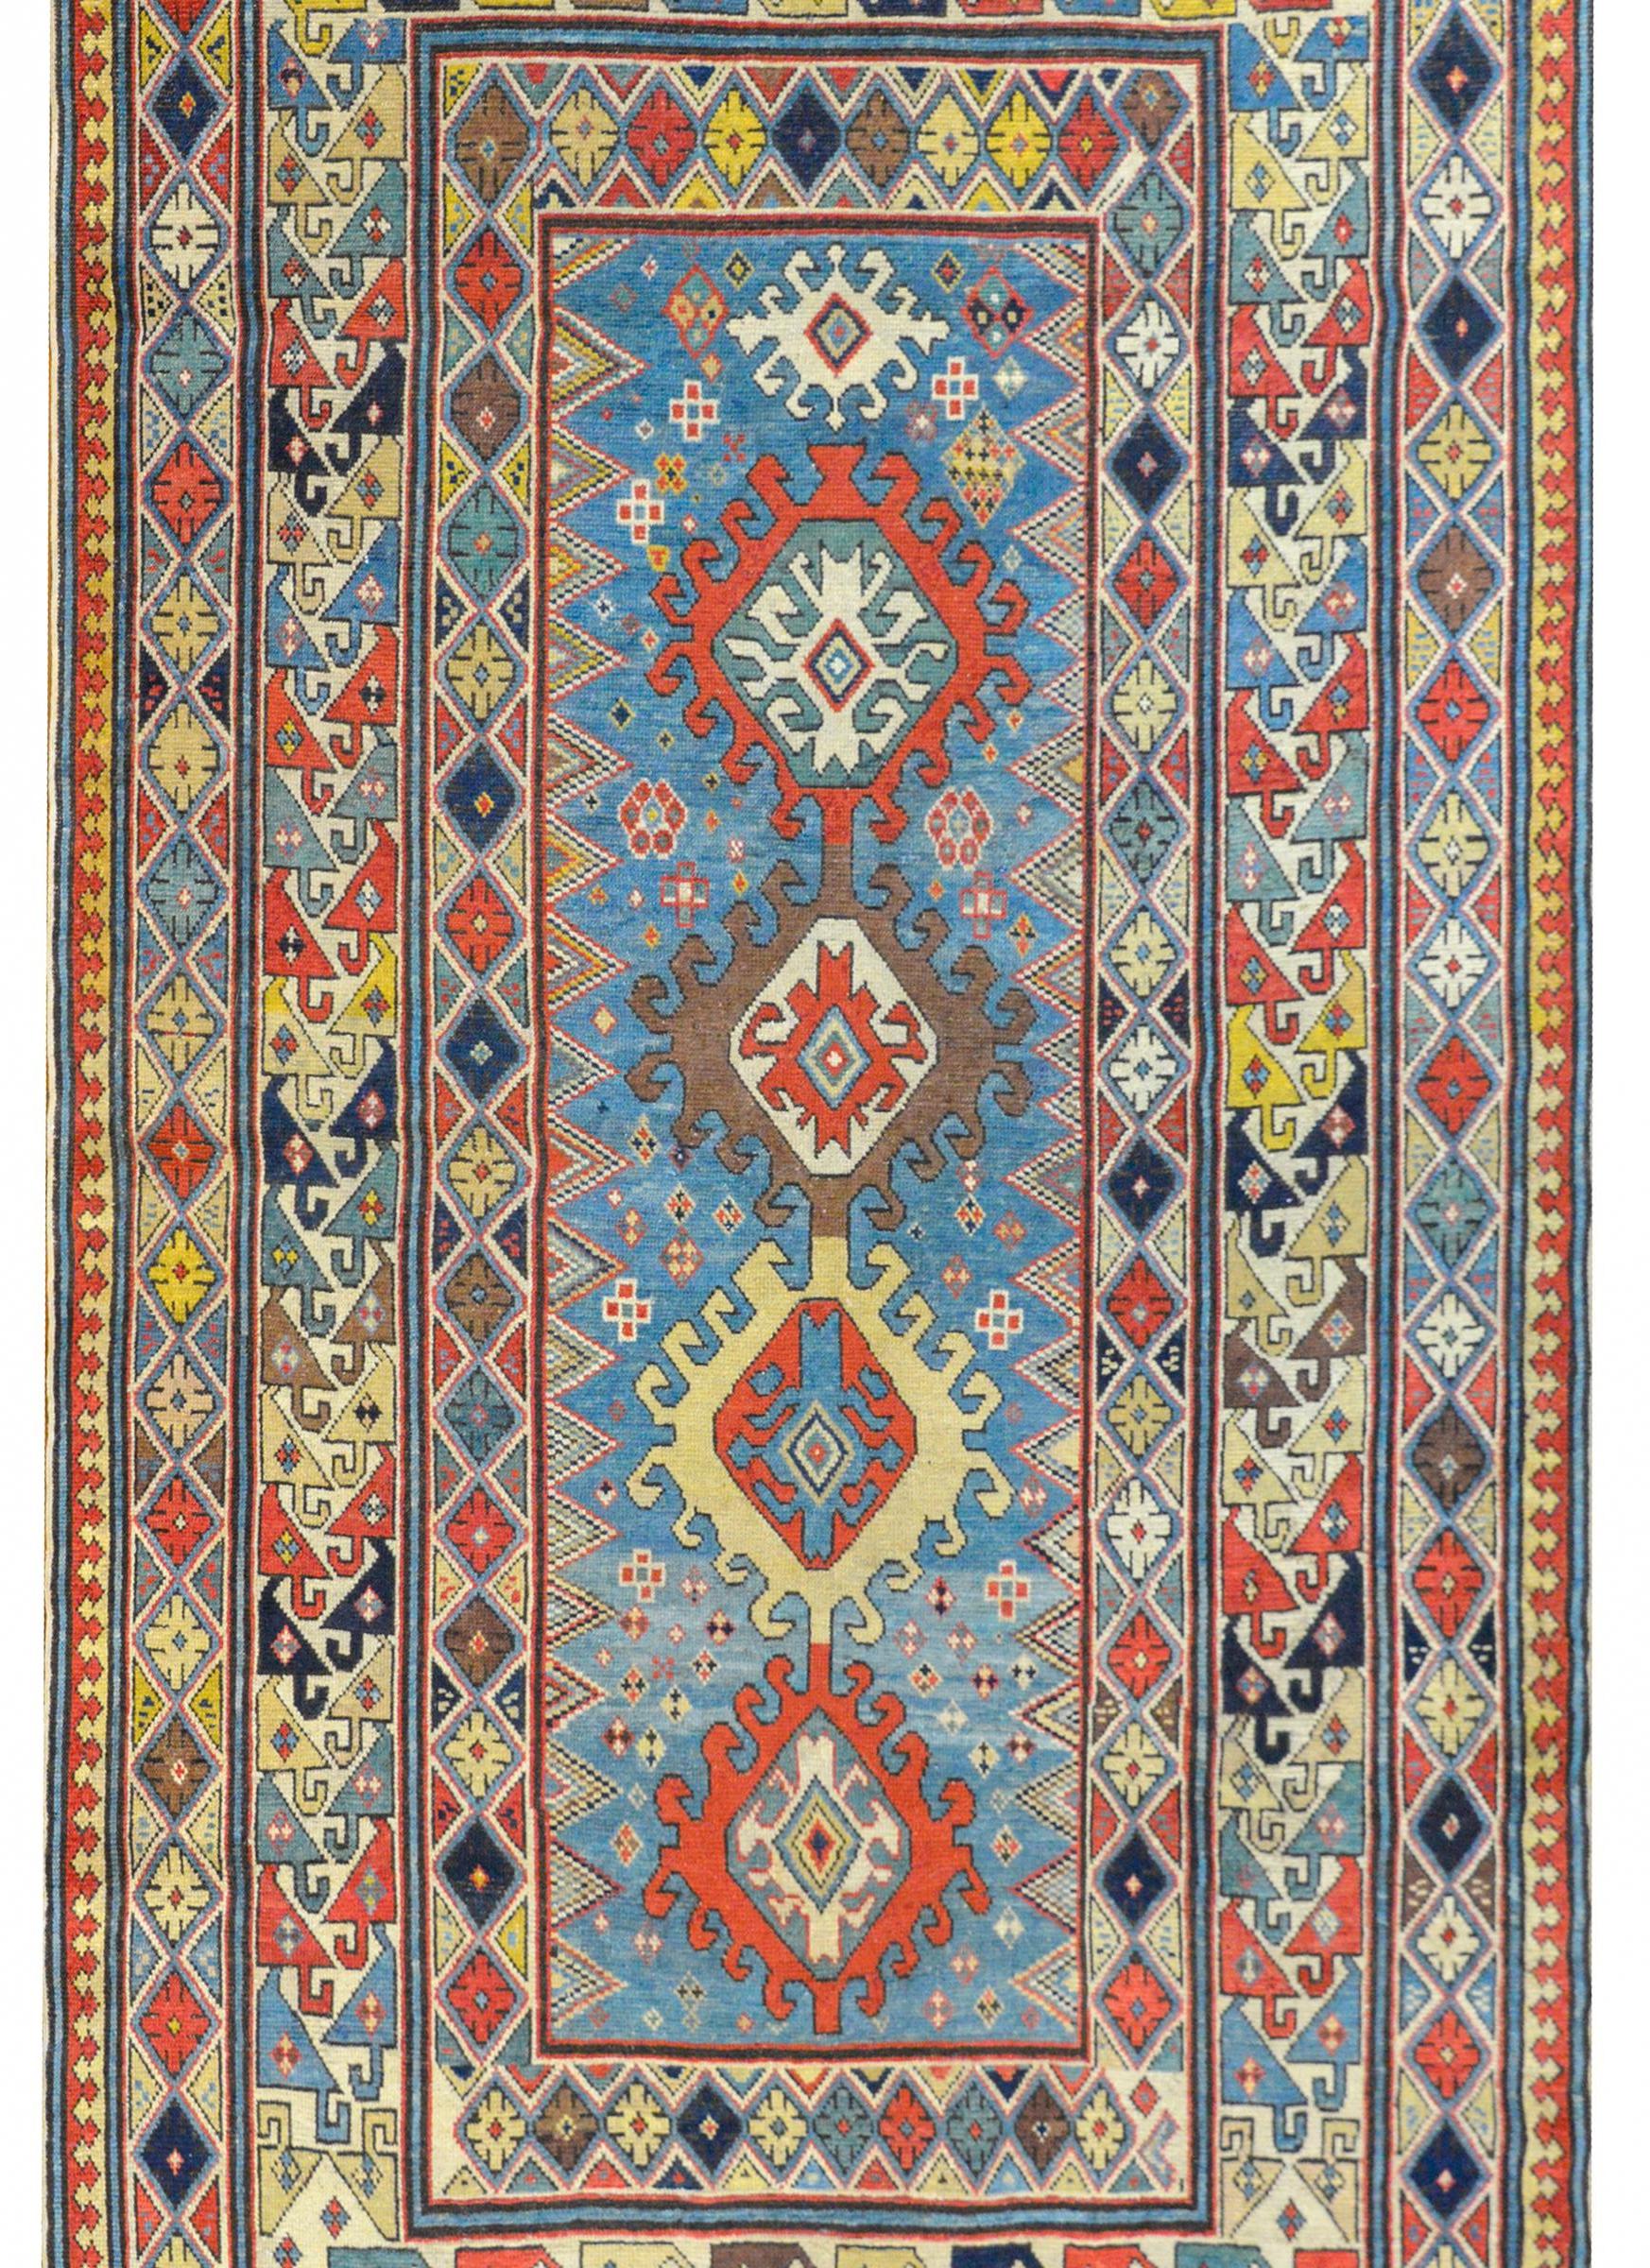 An incredible late 19th century Azerbaijani Kazak rug with several multicolored stylized floral medallions amidst a field of geometric patterned stylized flowers on a pale indigo field, surrounded by a wild border containing multiple multicolored